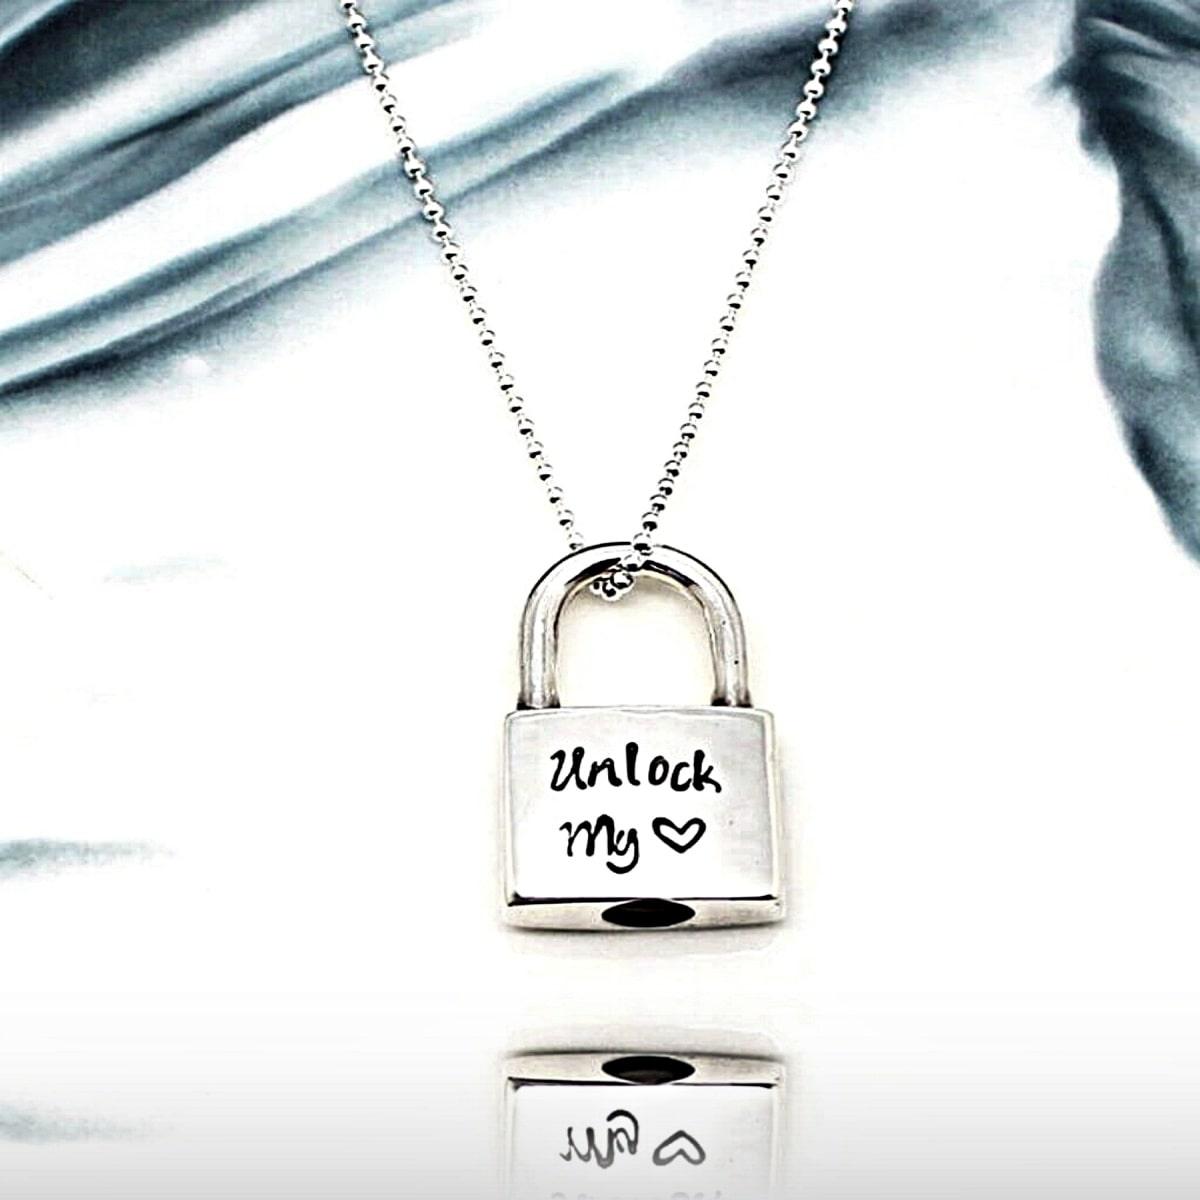  Initial Lock Necklace • Padlock Necklace • Mini Lock Pendant •  Engraved Lock Necklace • Letter Necklace • Gift For Her • Personalized Gift  : Productos Handmade